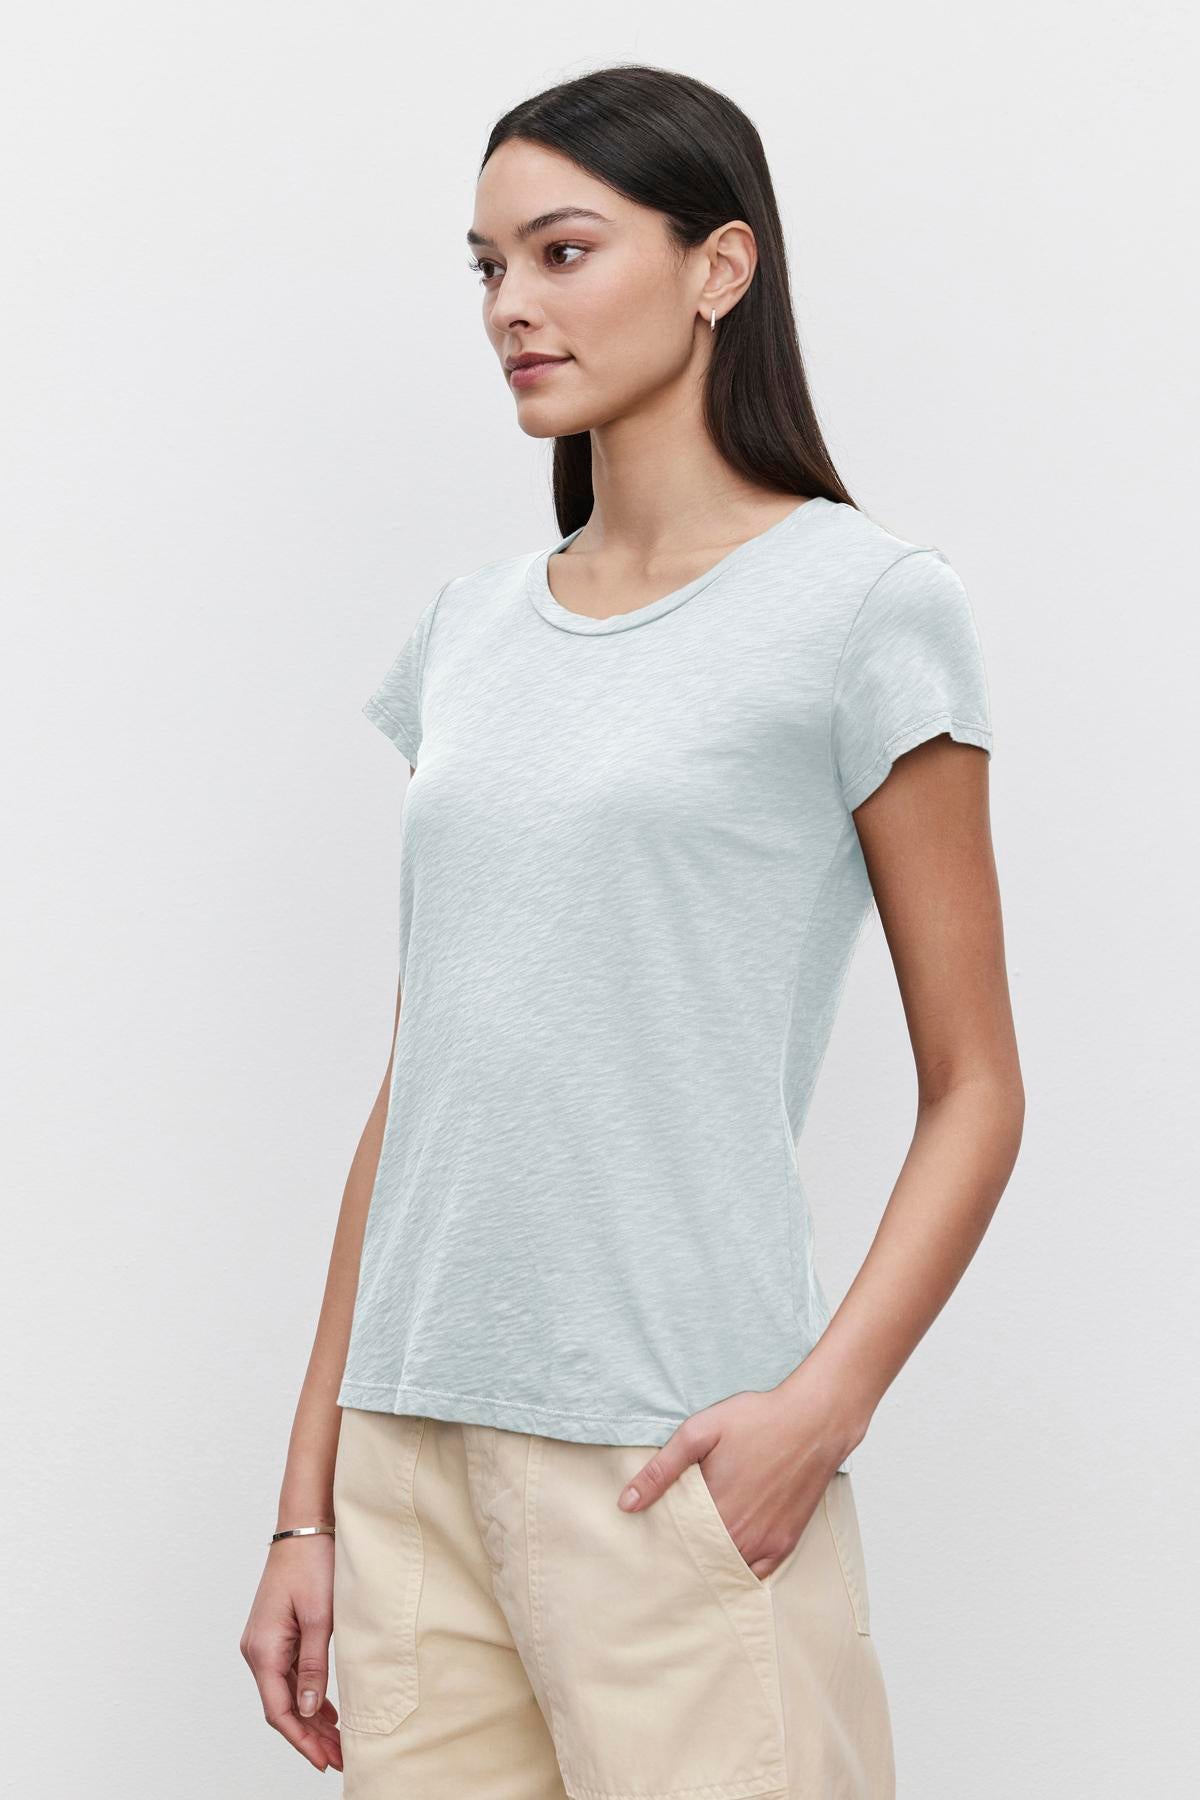 Woman standing against a white background, wearing a Velvet by Graham & Spencer ODELIA COTTON SLUB CREW NECK TEE in light blue and beige pants, looking to the side.-36653432996033